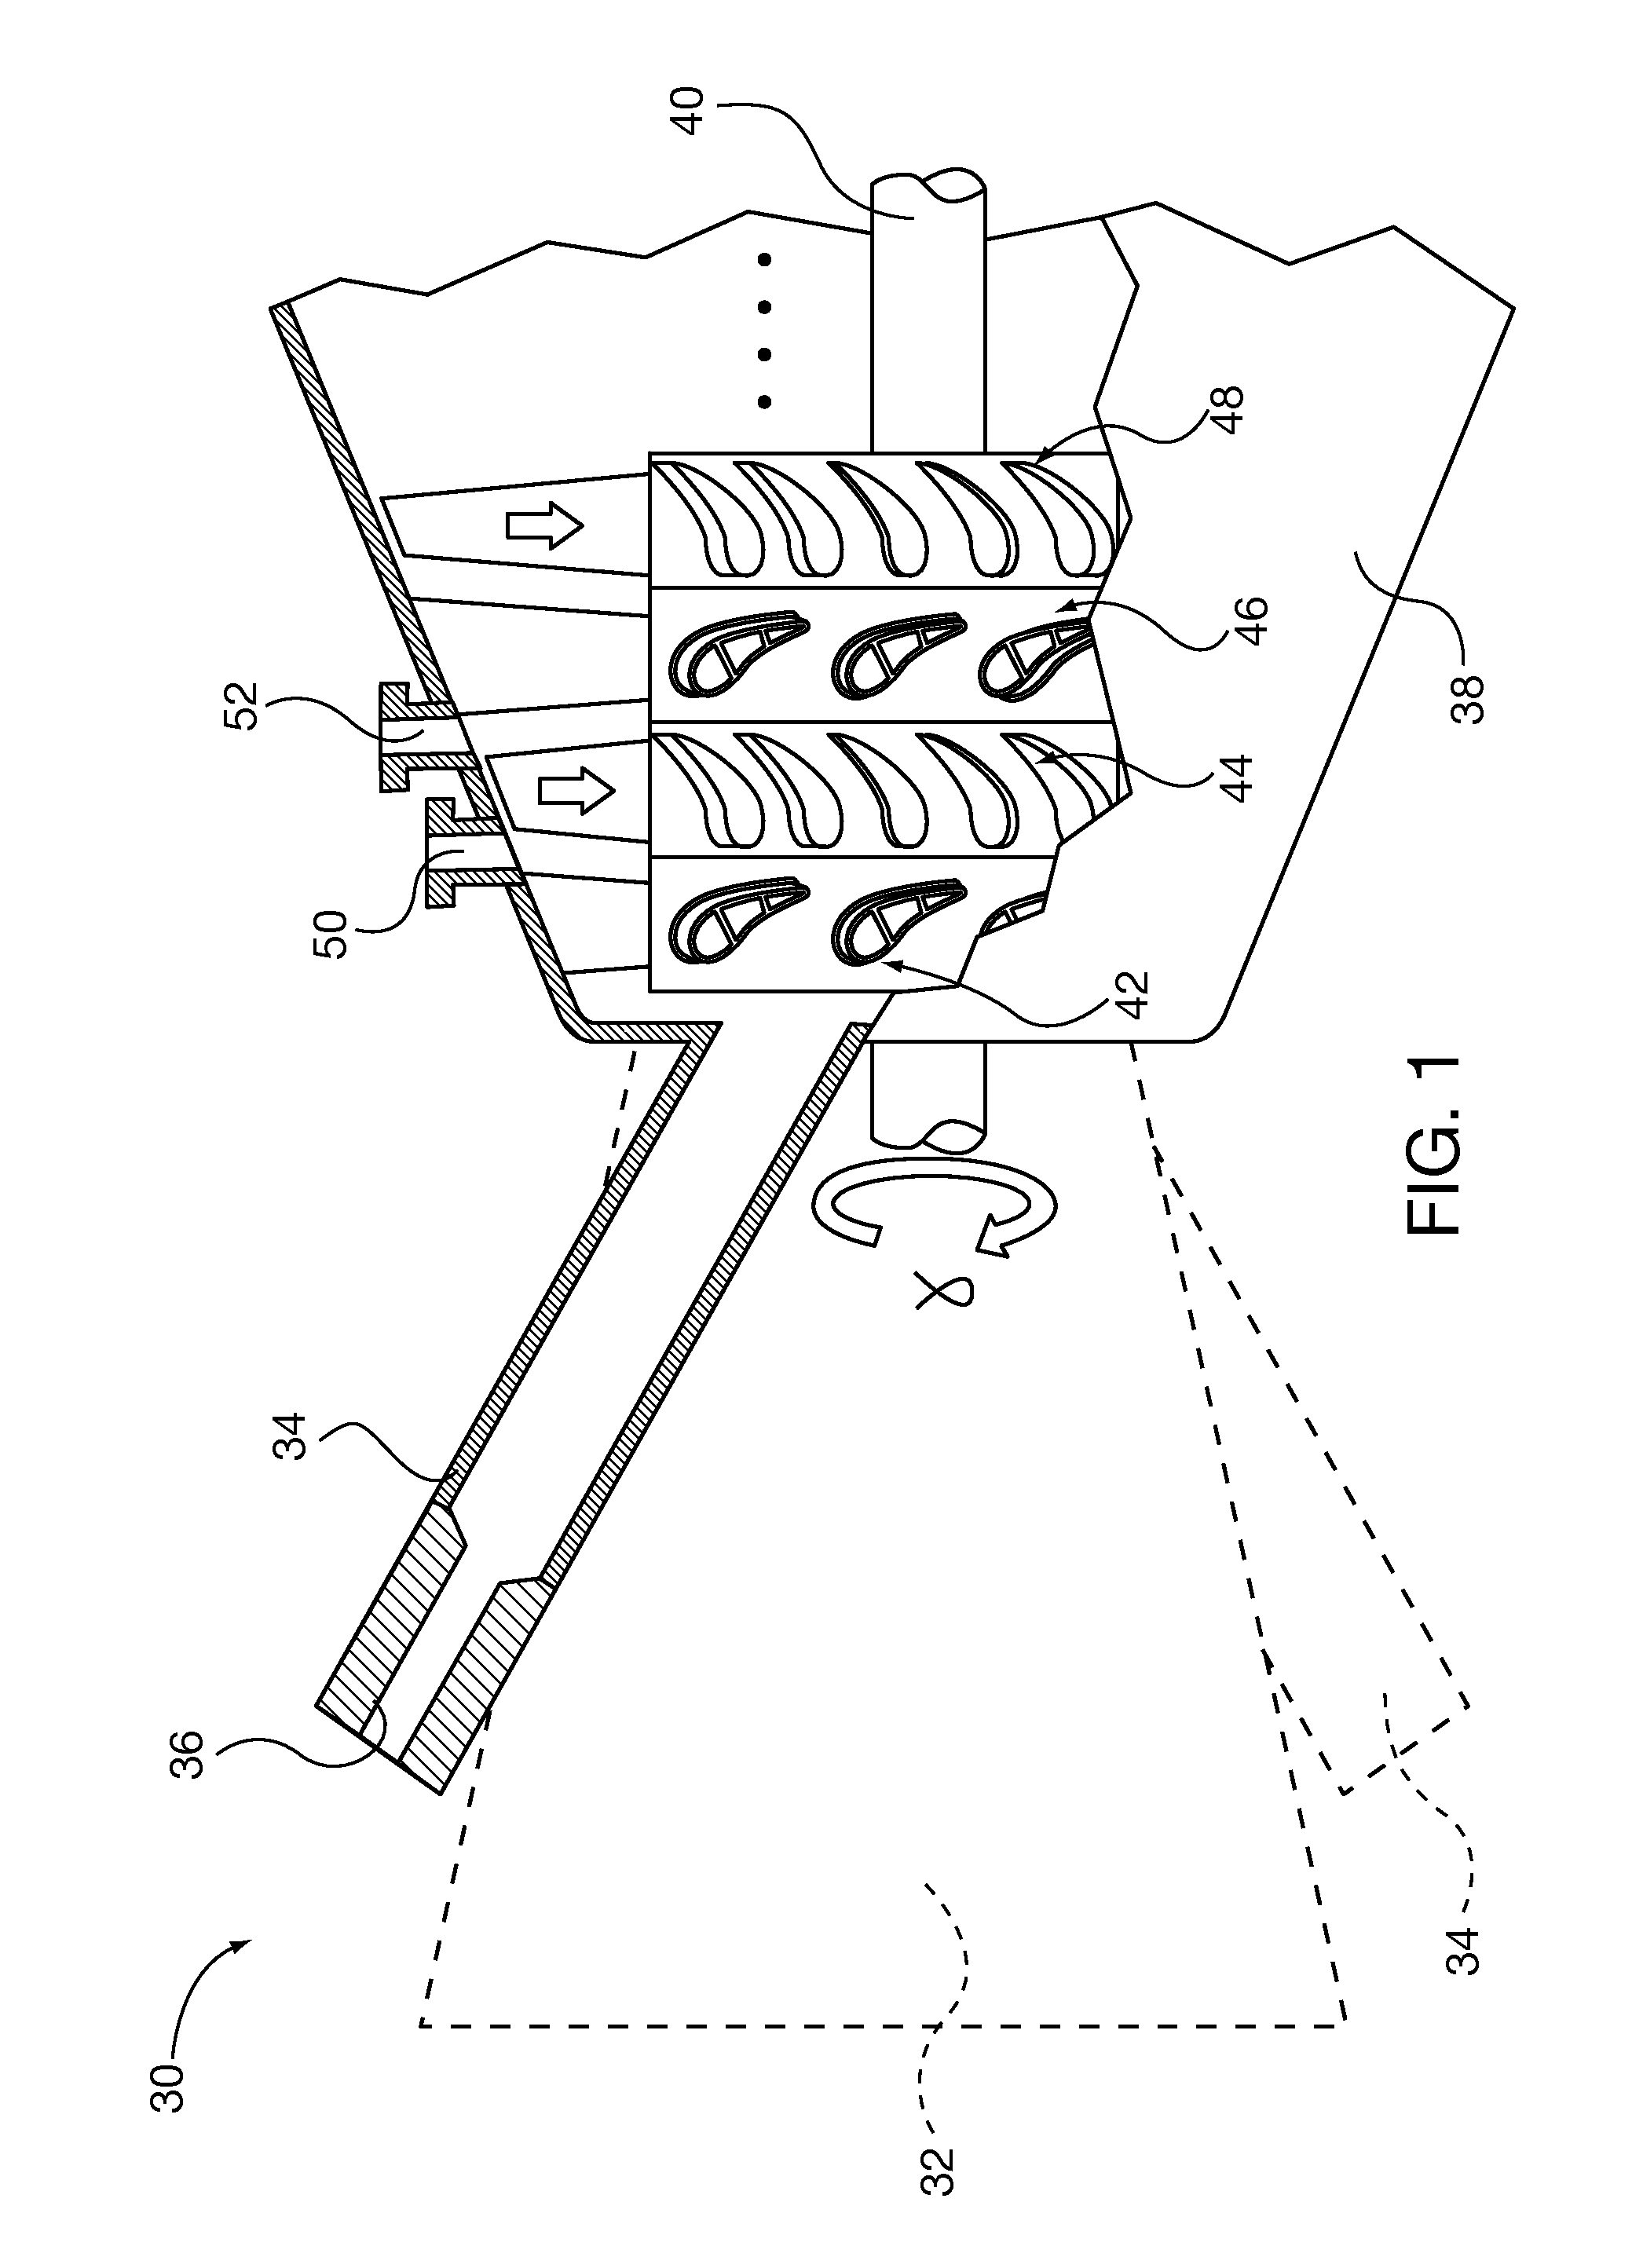 System and method for visual inspection and 3D white light scanning of off-line industrial gas turbines and other power generation machinery